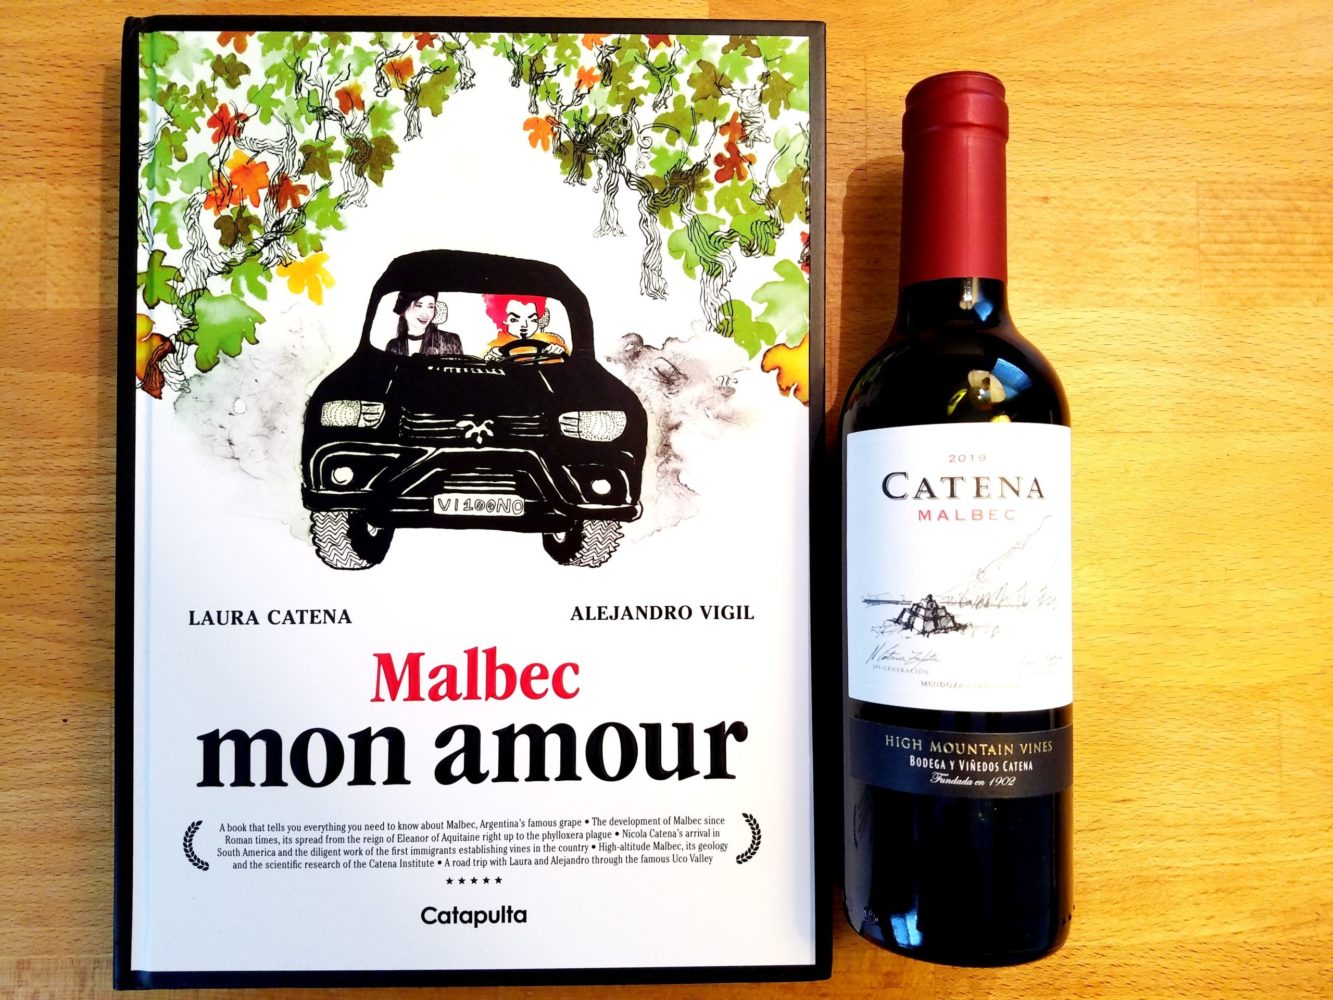 Book Review & Wine Pairing: Malbec Mon Amour - A Definitive Guide to Malbec by One of Argentina’s Most Important Wine-Producing Families, the Catena Family